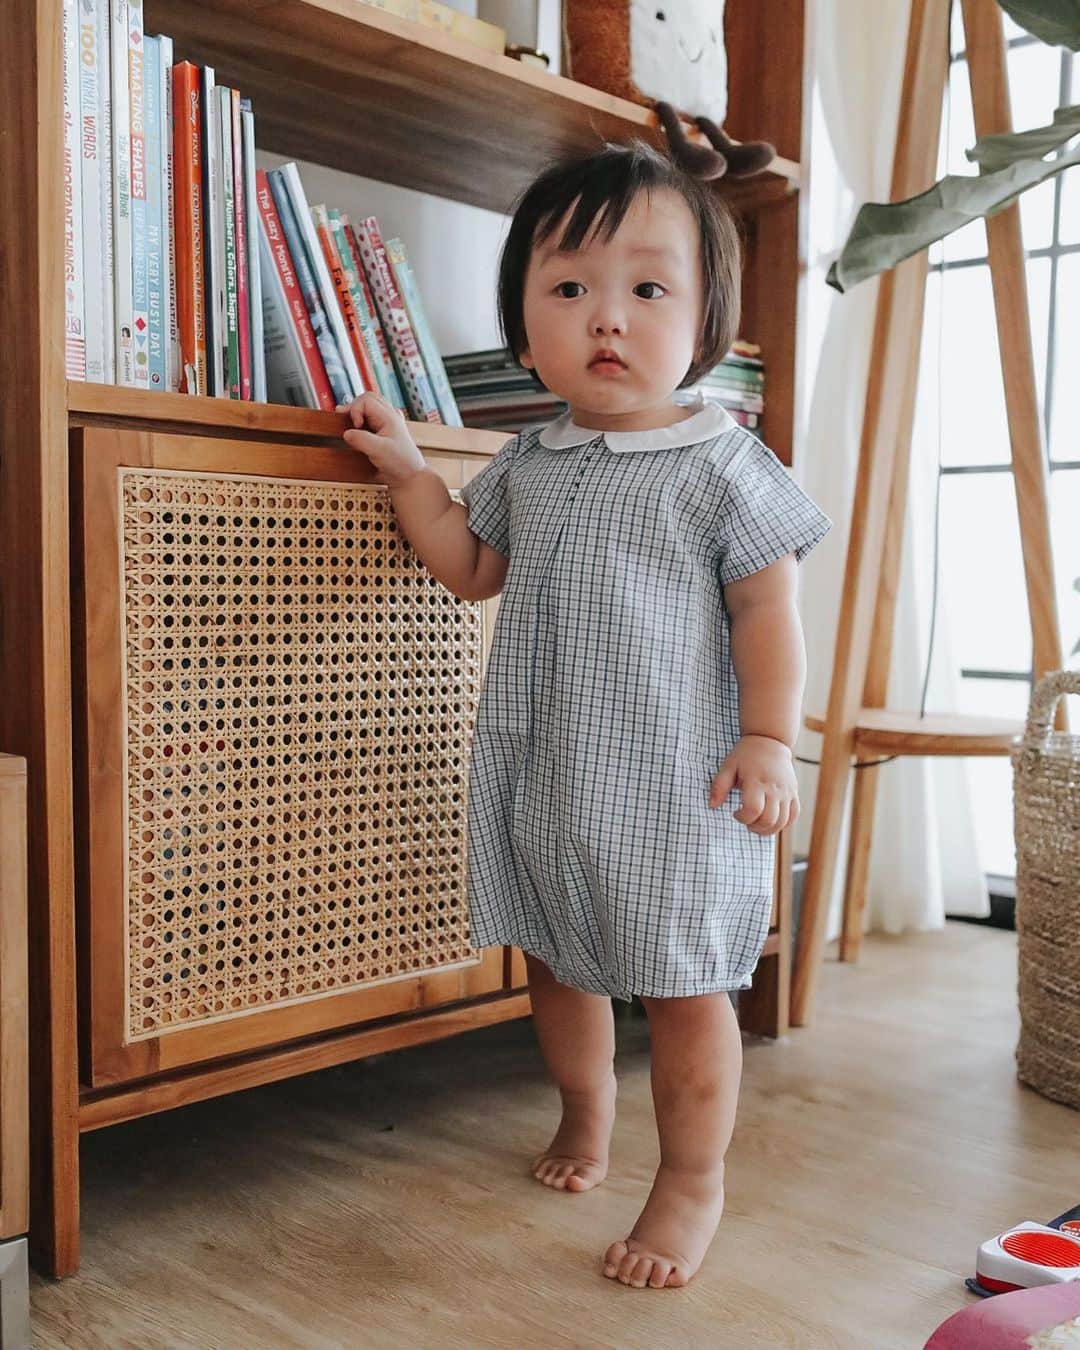 MOMOツインズのインスタグラム：「Our little bookworm. Every morning after breakfast, we’ll find him toddling to the shelf to pick out his own books. It has become a routine and so so adorable to watch! Some days he’ll come by and sit on my lap, wanting me to read to him. On other days, he prefers to explore the books on his own. His current favourites are The Jungle Book, Bunny Breaths, Bugs and Minibeasts, Dear Zoo and Peekaboo Penguin. Hoping that this blossoms into a life-long love for reading!  #luke  Bookshelf and lamp from @rooma_sg Books from @times.reads」